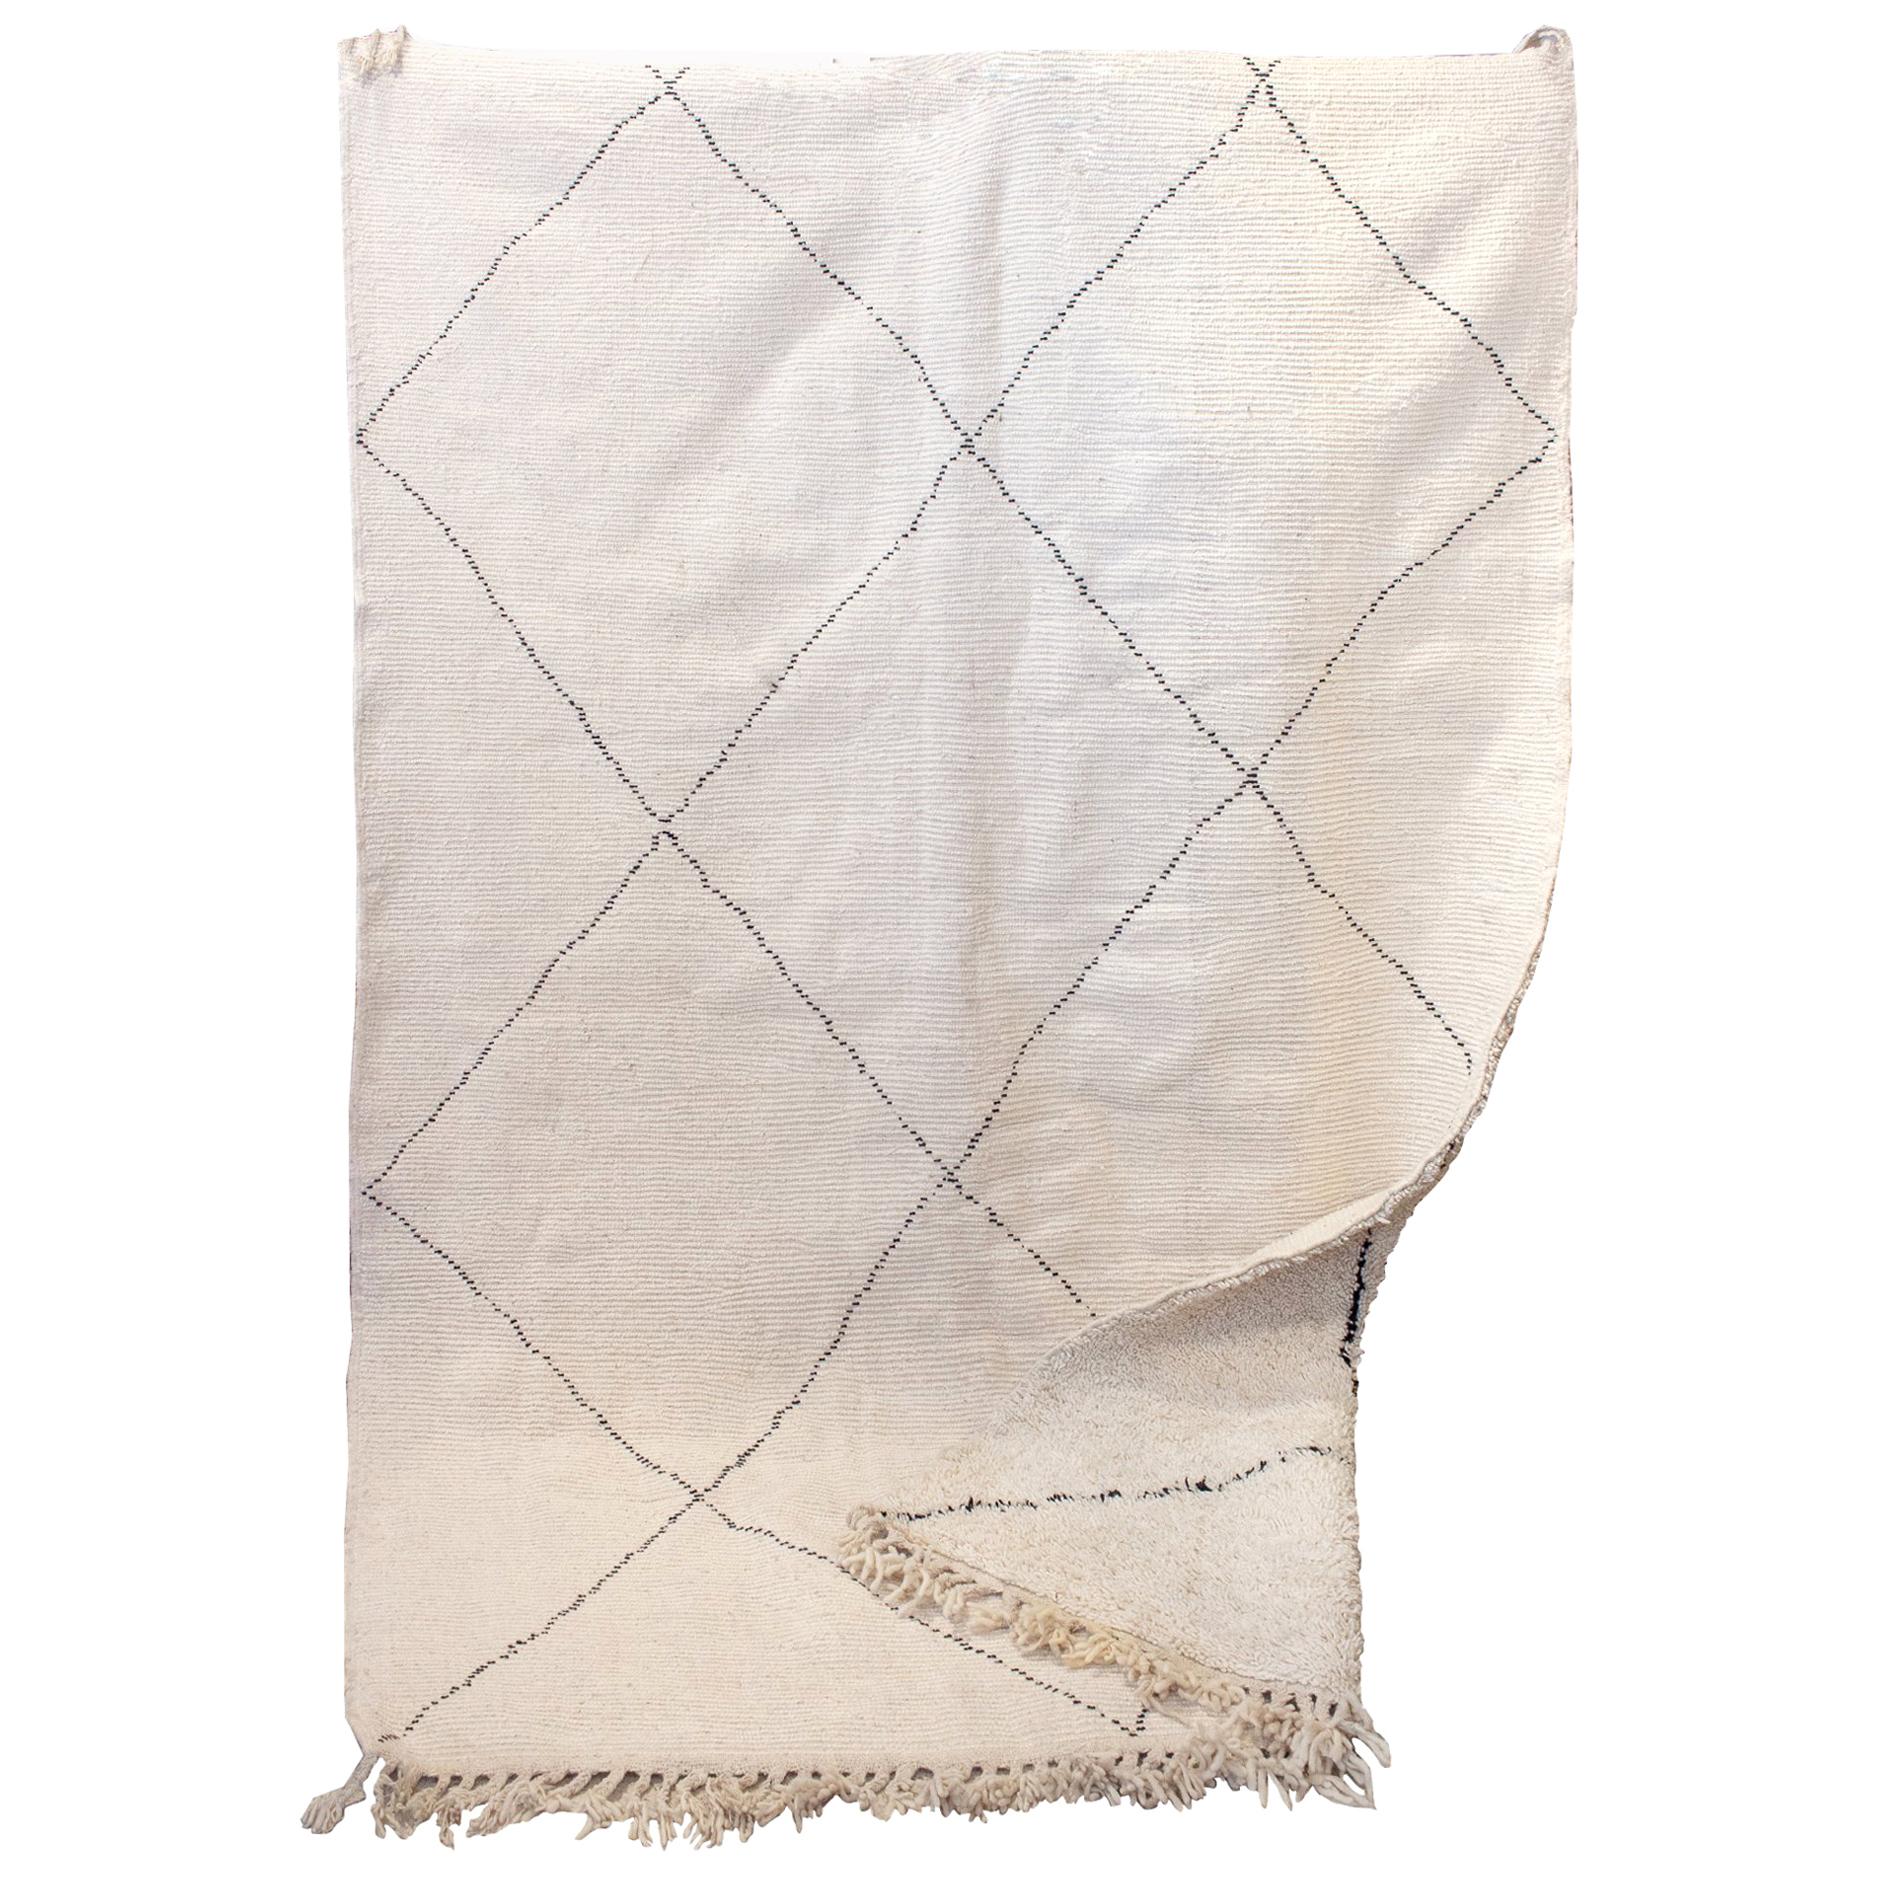 Moroccan Beni Ourain Double-Sided Berber Rug in Ivory and Black